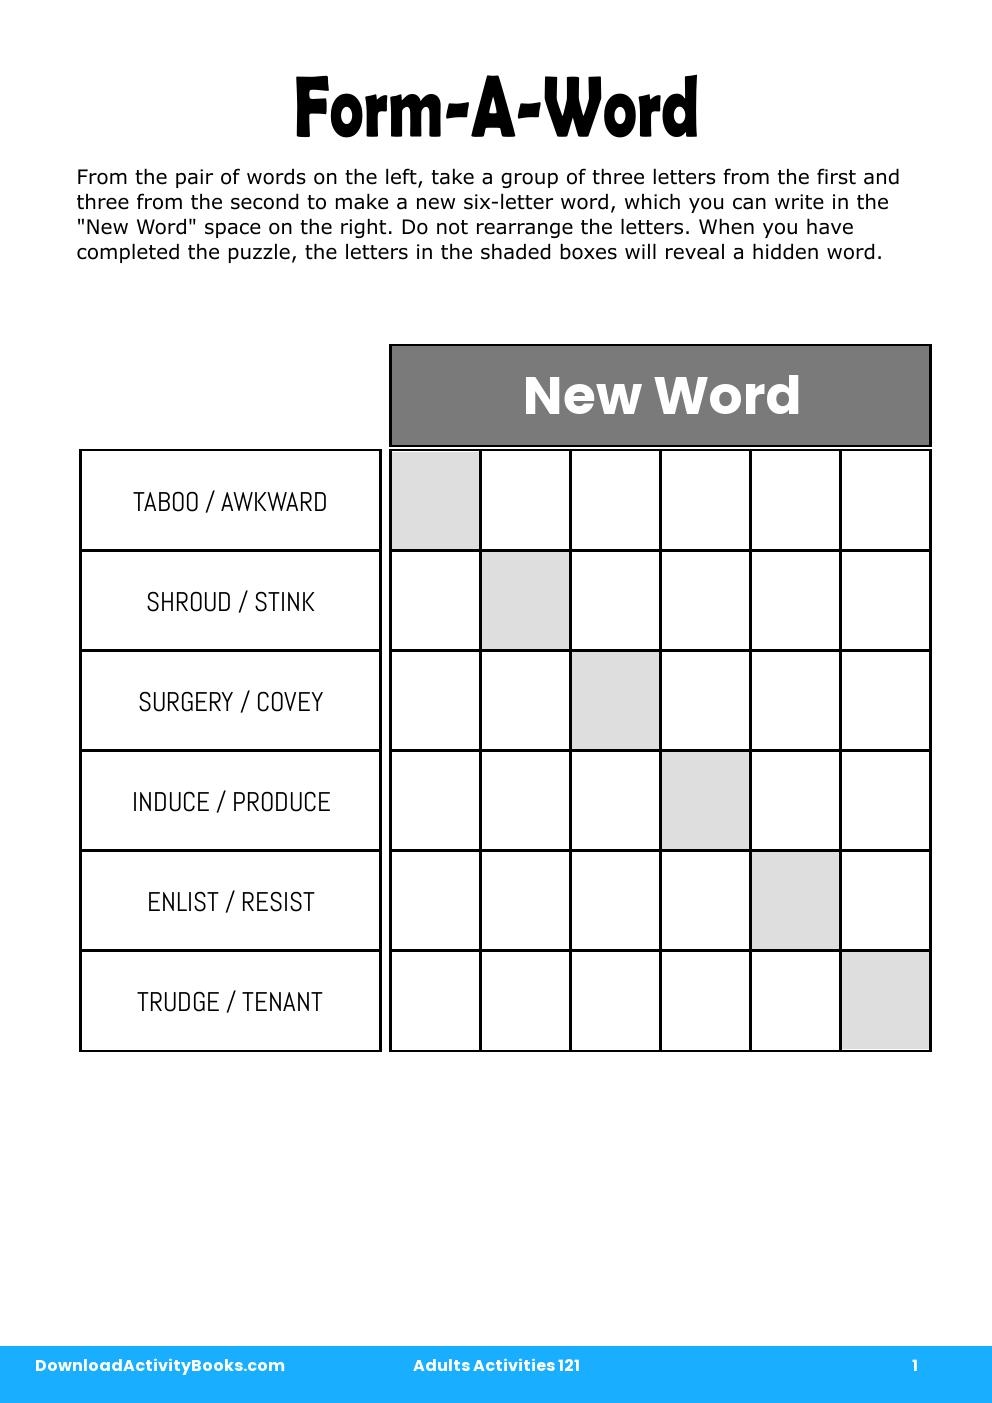 Form-A-Word in Adults Activities 121